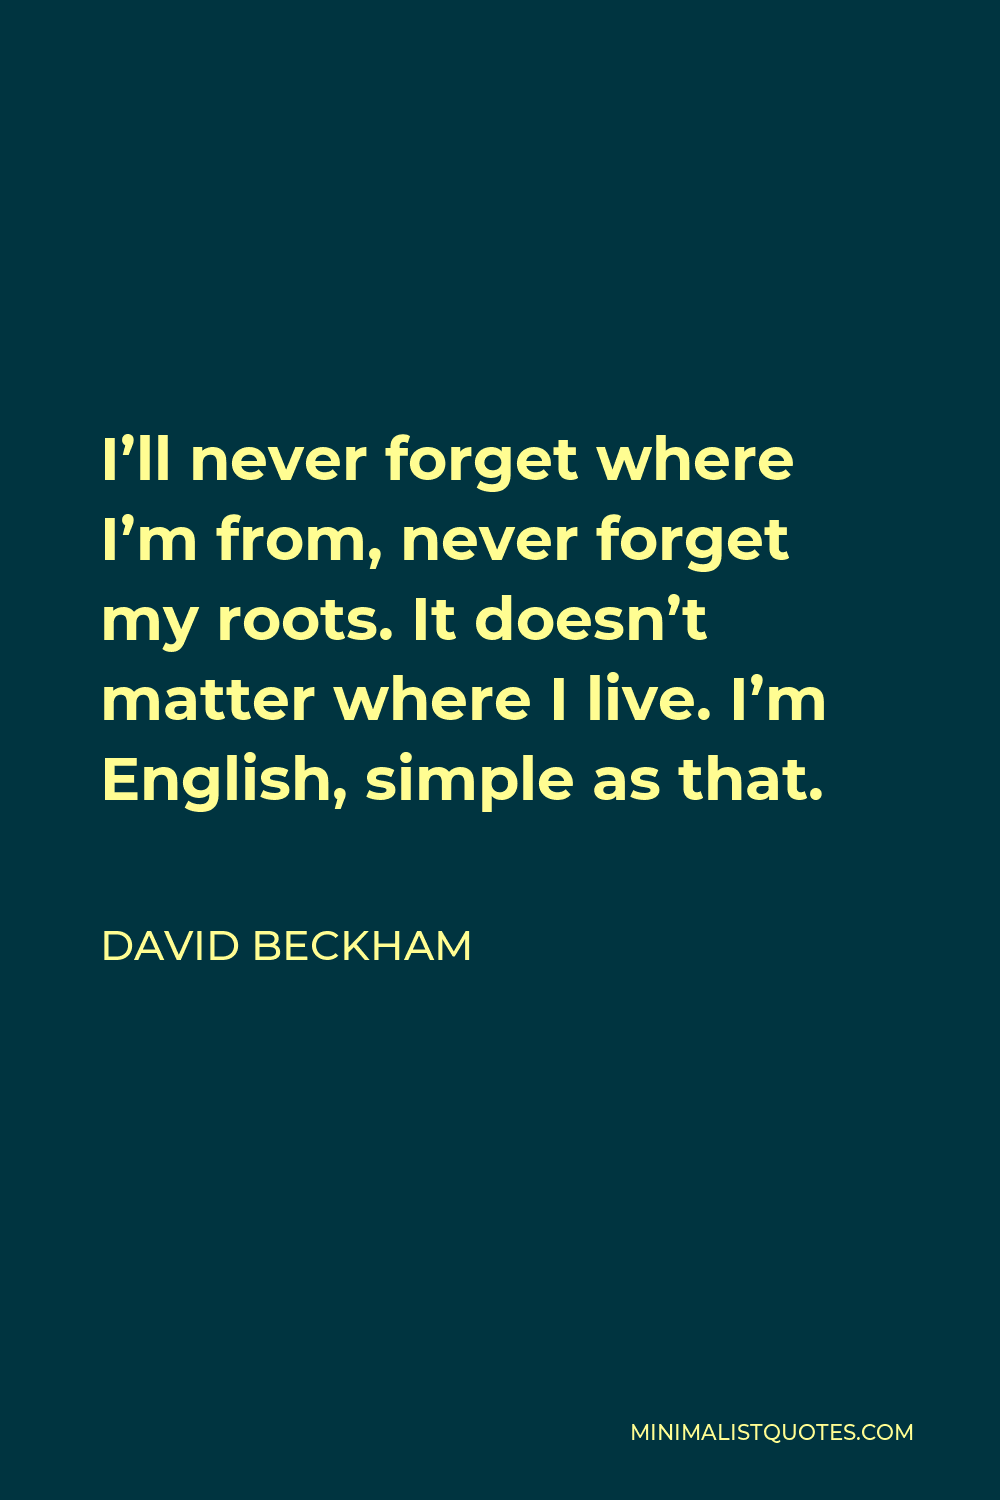 David Beckham Quote - I’ll never forget where I’m from, never forget my roots. It doesn’t matter where I live. I’m English, simple as that.